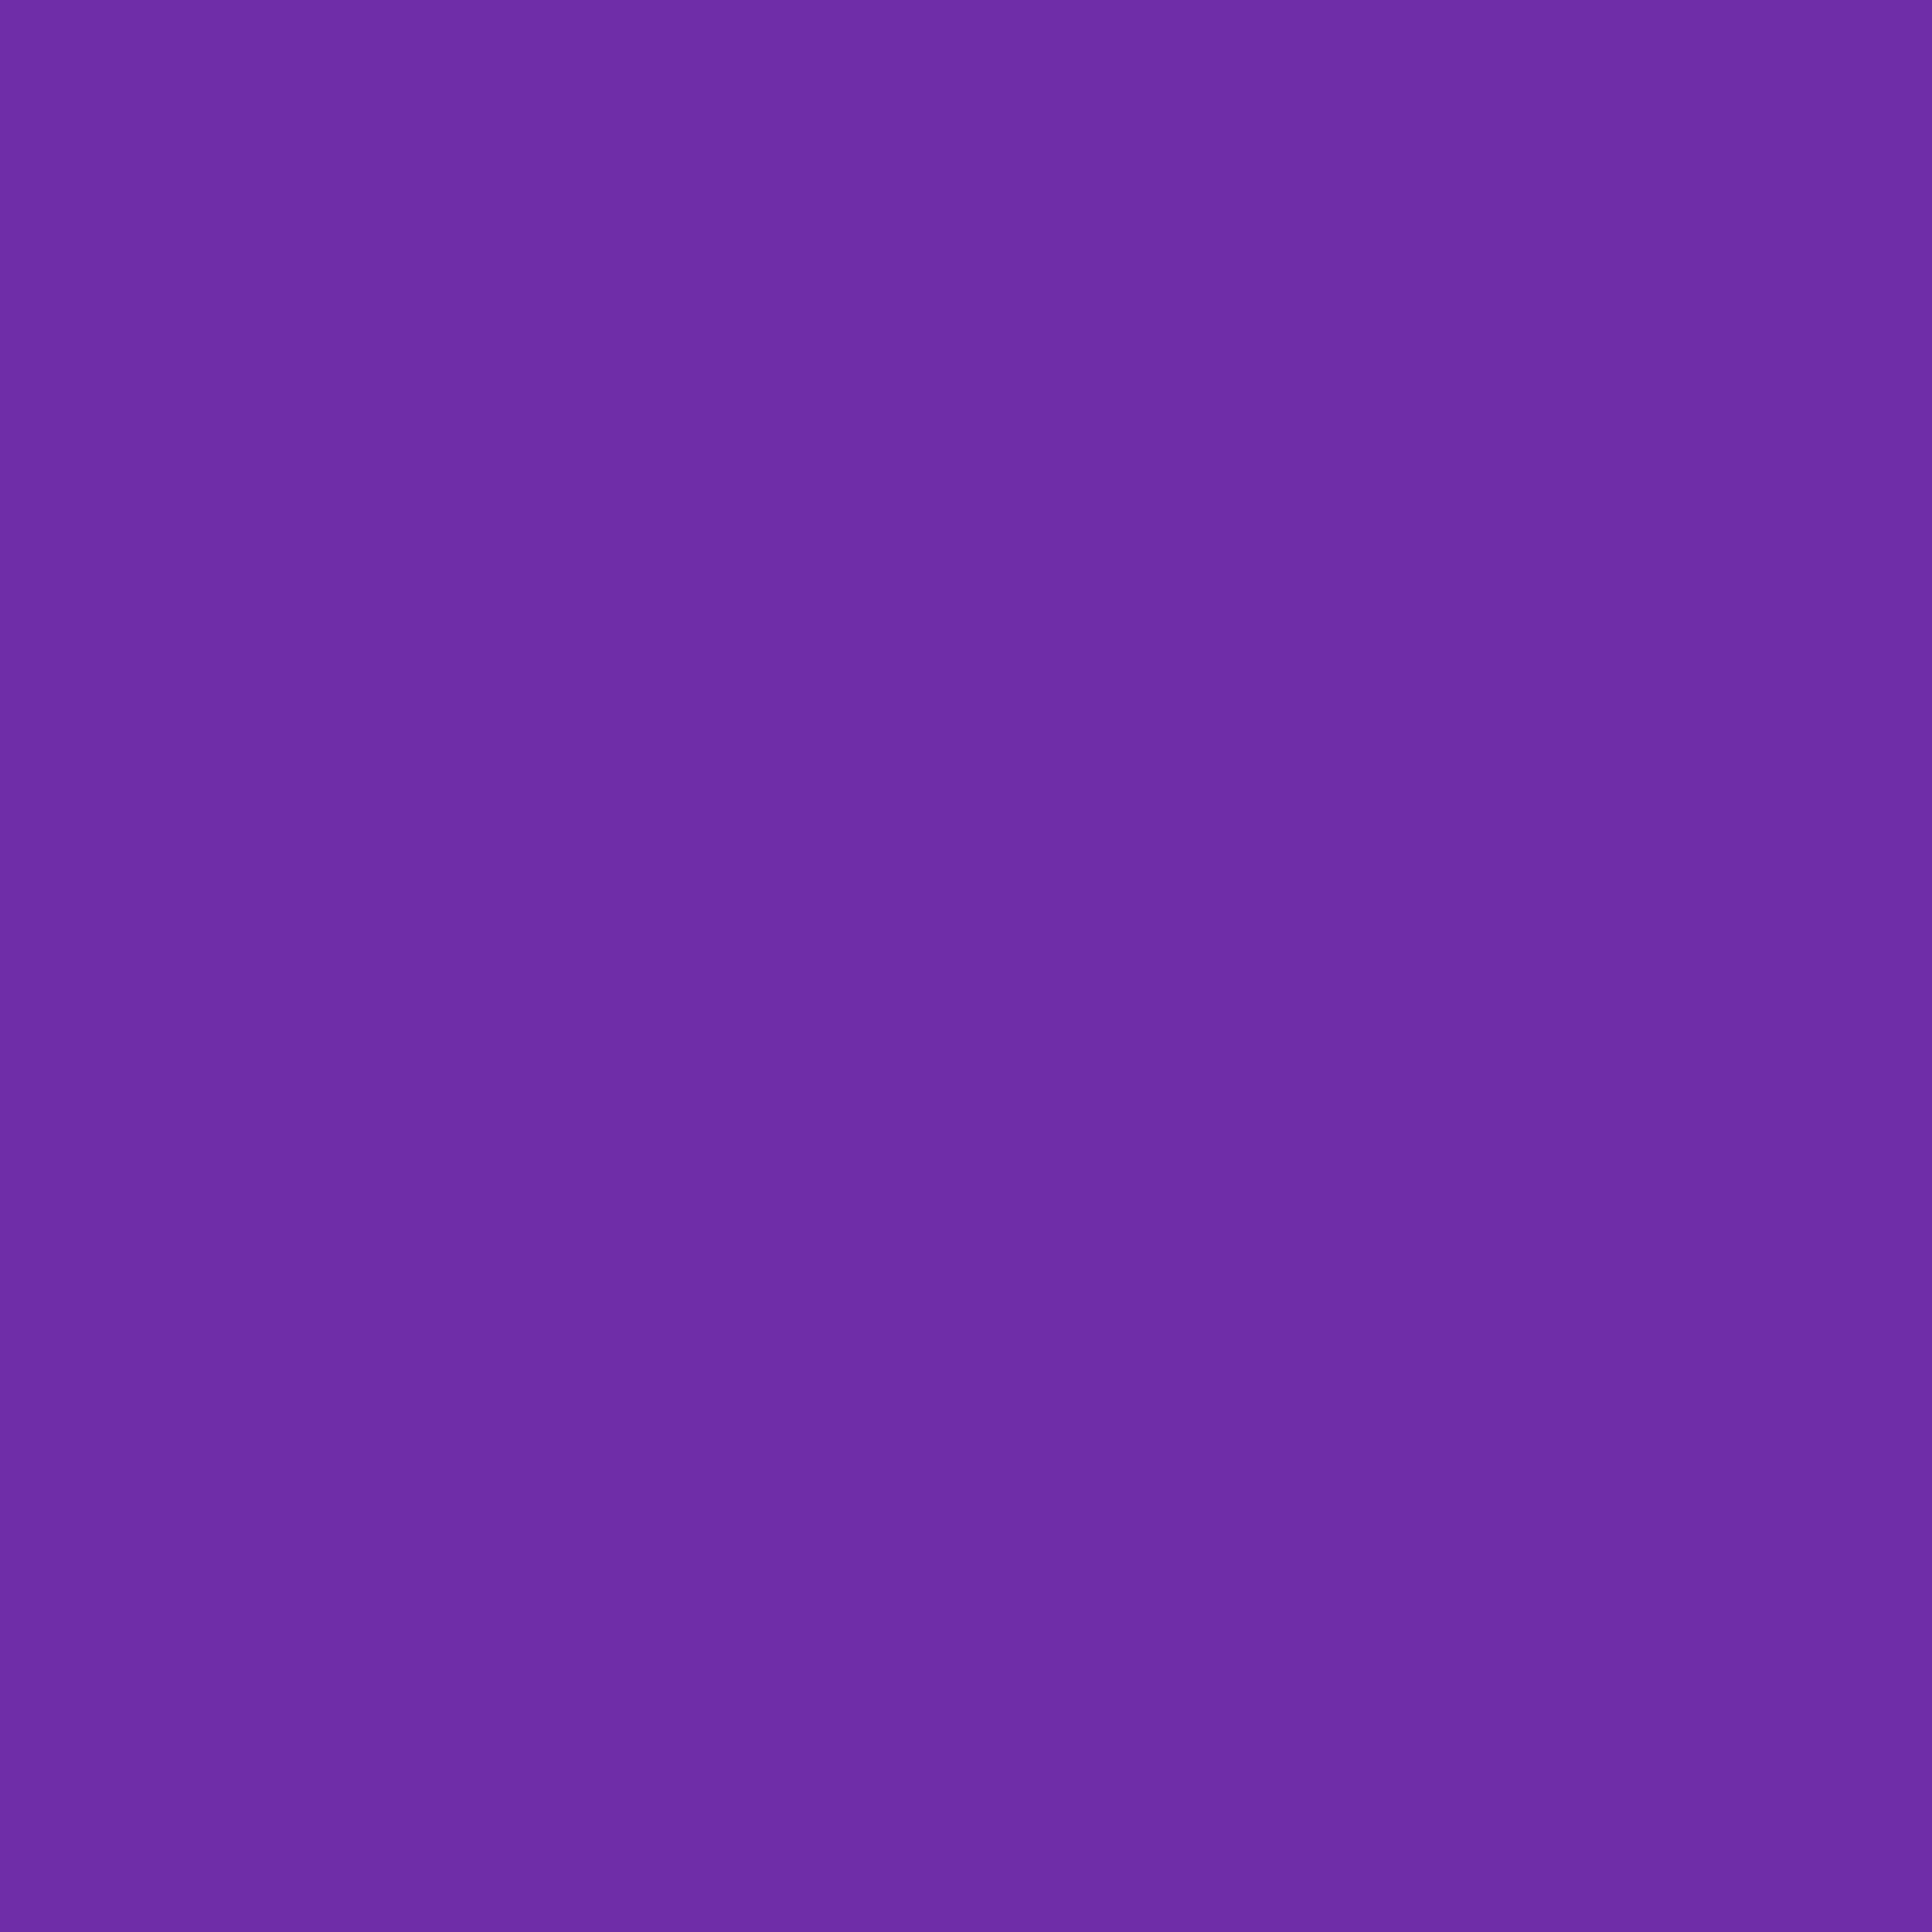 2732x2732 Grape Solid Color Background